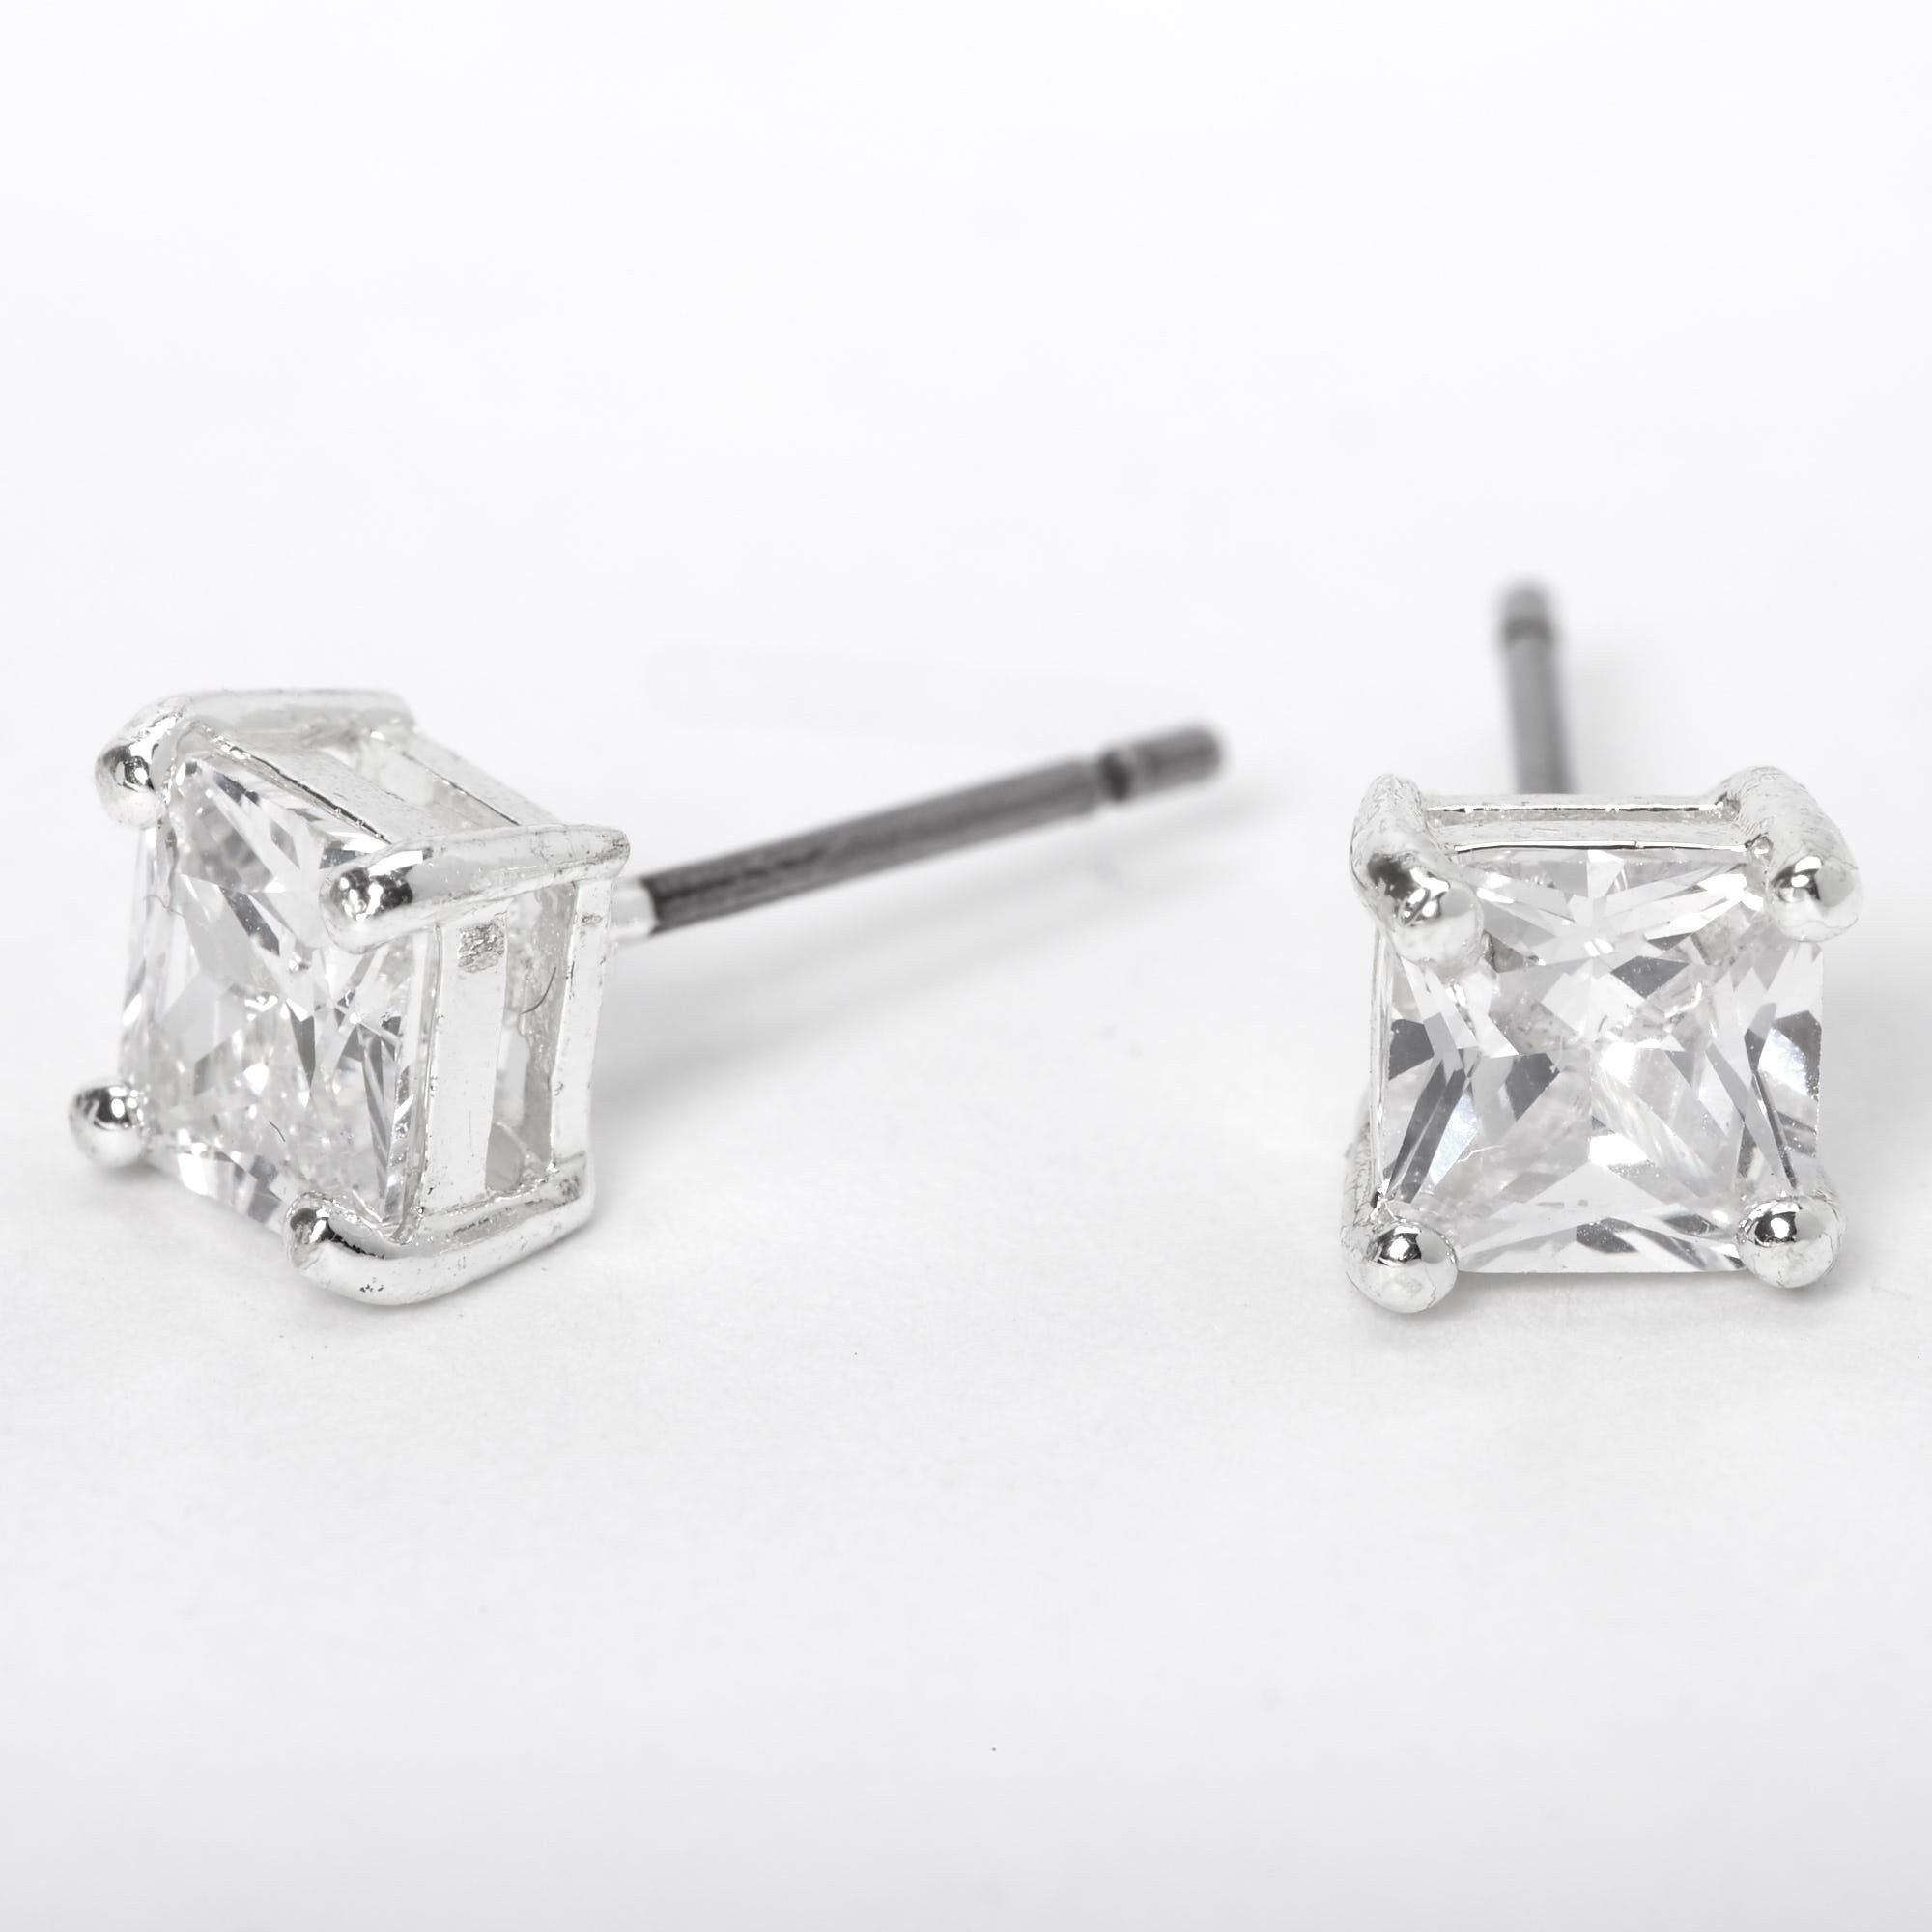 Mens 925 Sterling Silver Square CZ Screw Back Stud Earrings 4mm - China  Sterling Silver Earrings and Stud Earrings price | Made-in-China.com